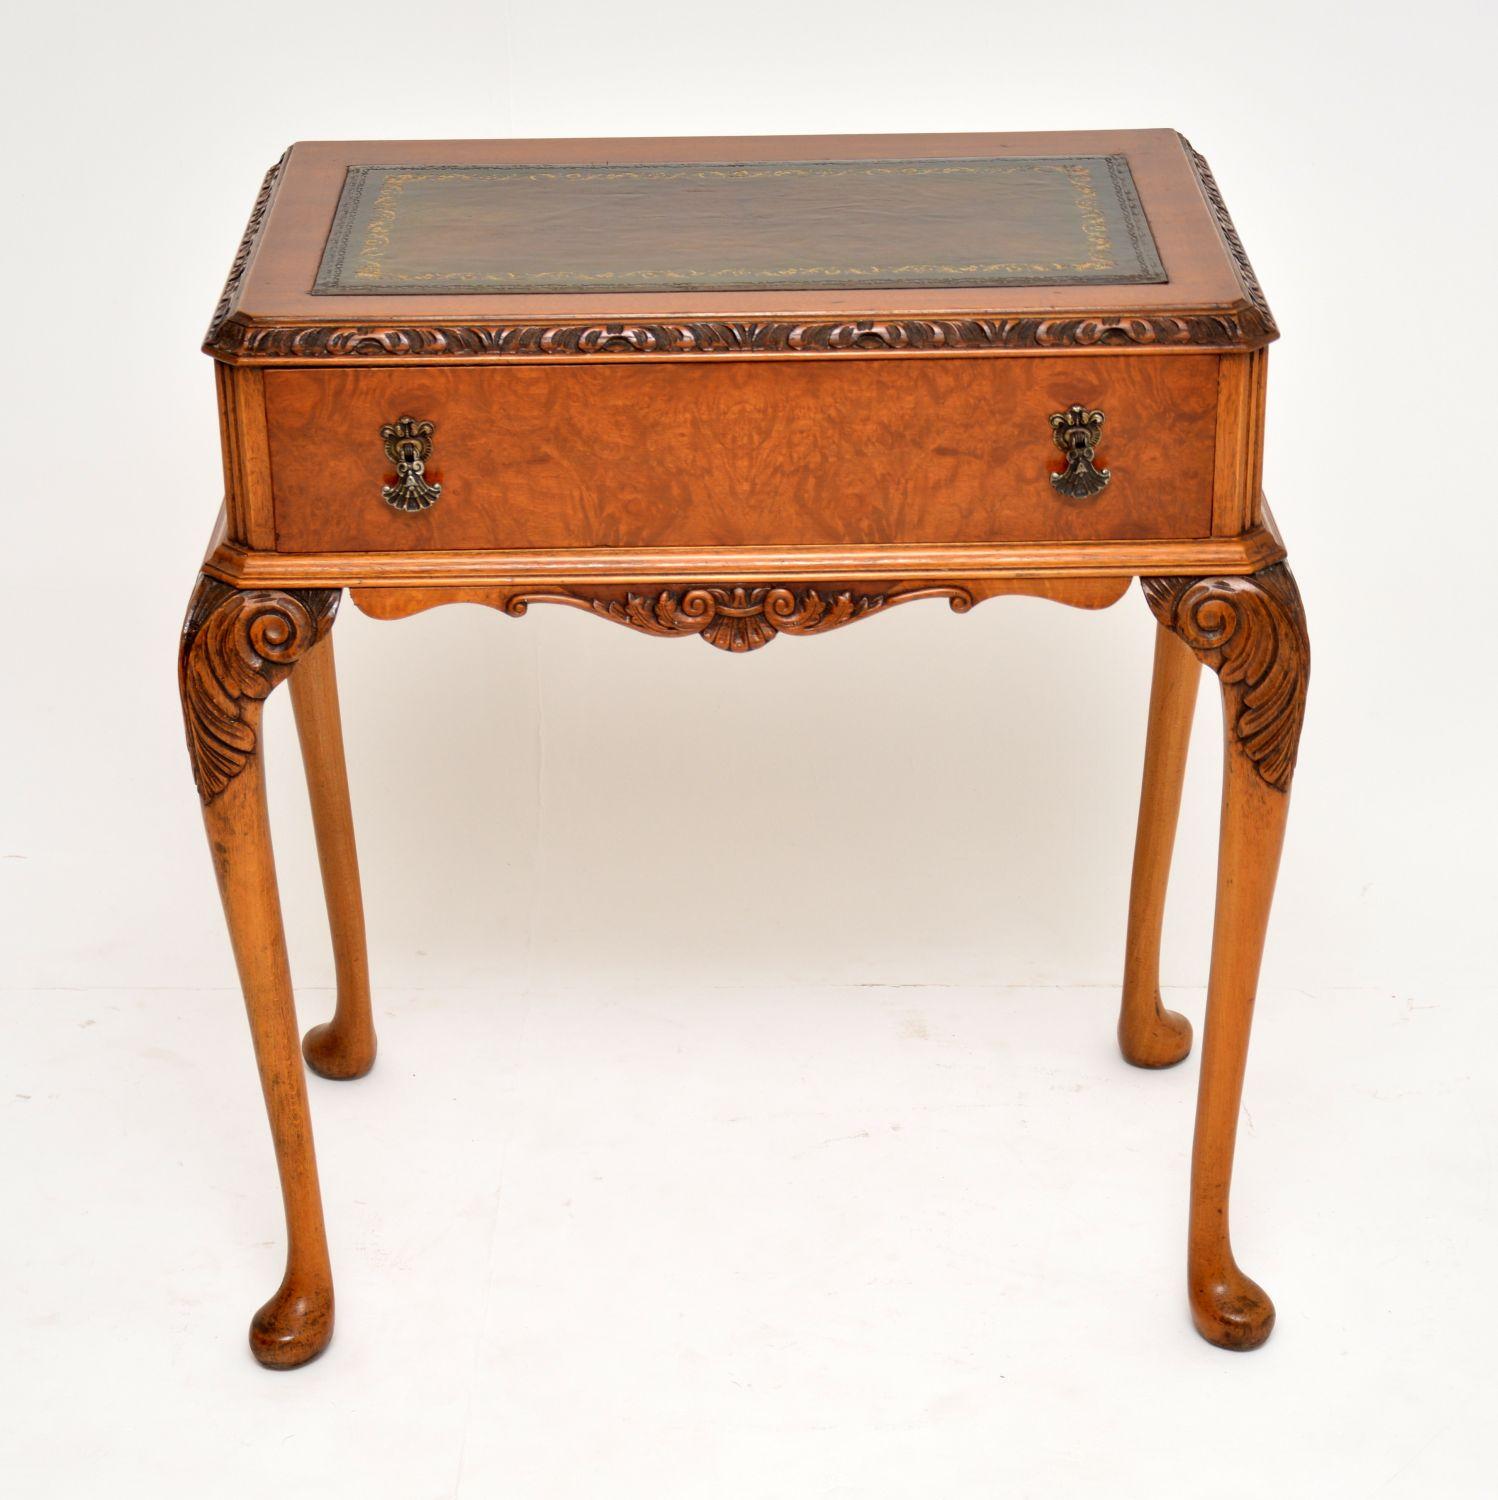 Small antique Queen Anne style walnut writing table desk with a tooled leather writing surface. It has grooved canted corners, a carved top edge, plus carvings on & between the solid walnut legs. The single drawer has a burr walnut front & original